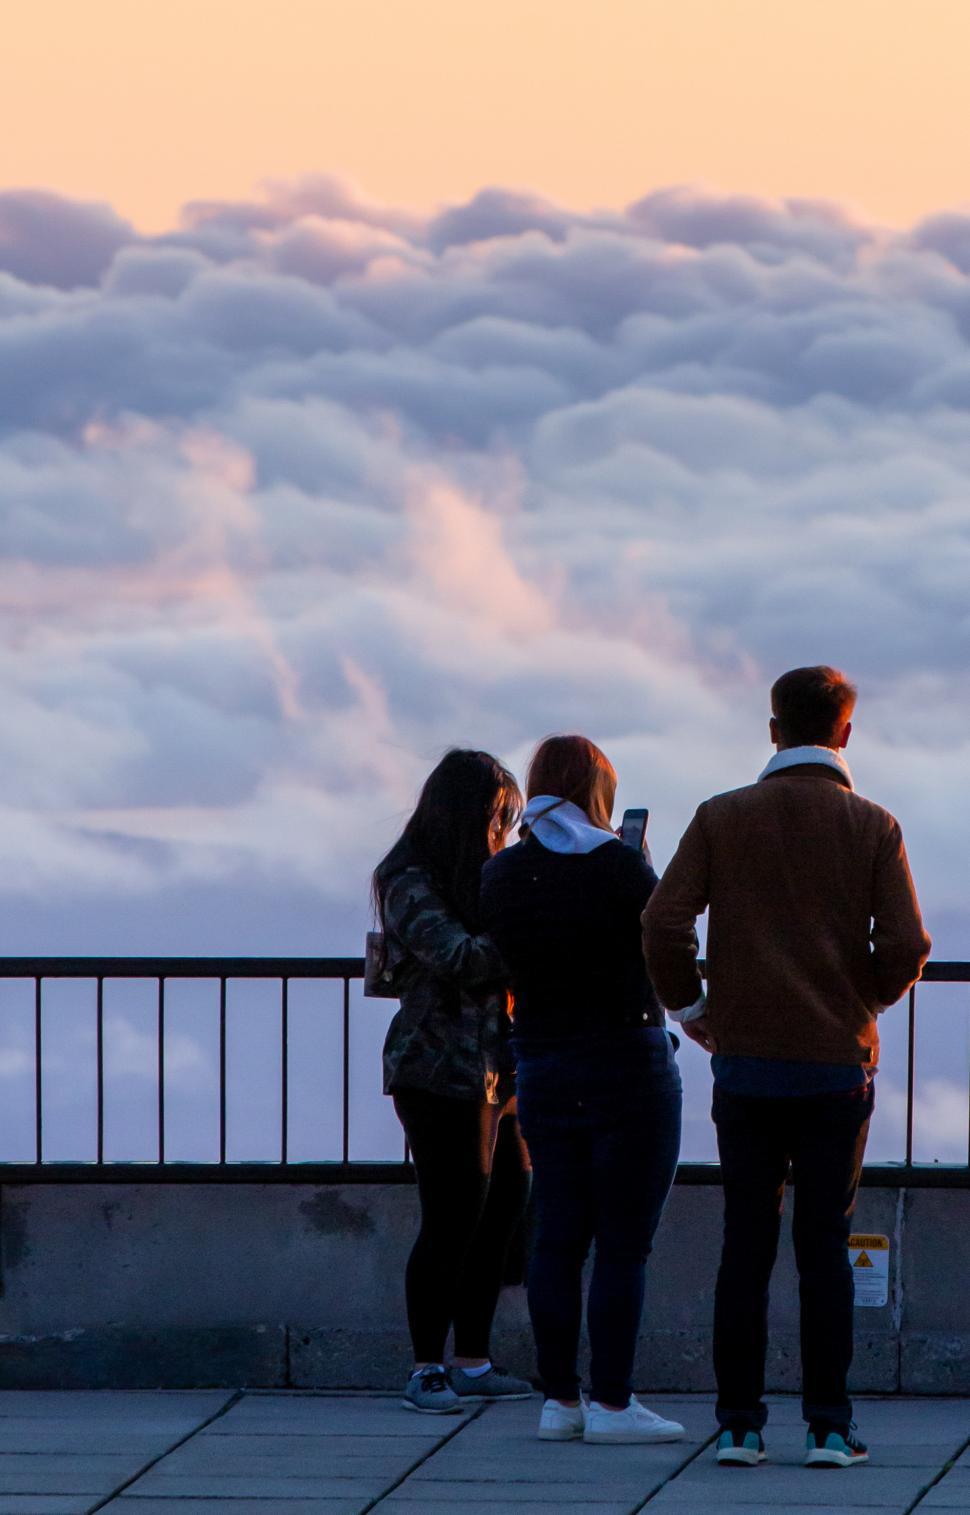 Free Image of A group of people standing on a balcony overlooking clouds 